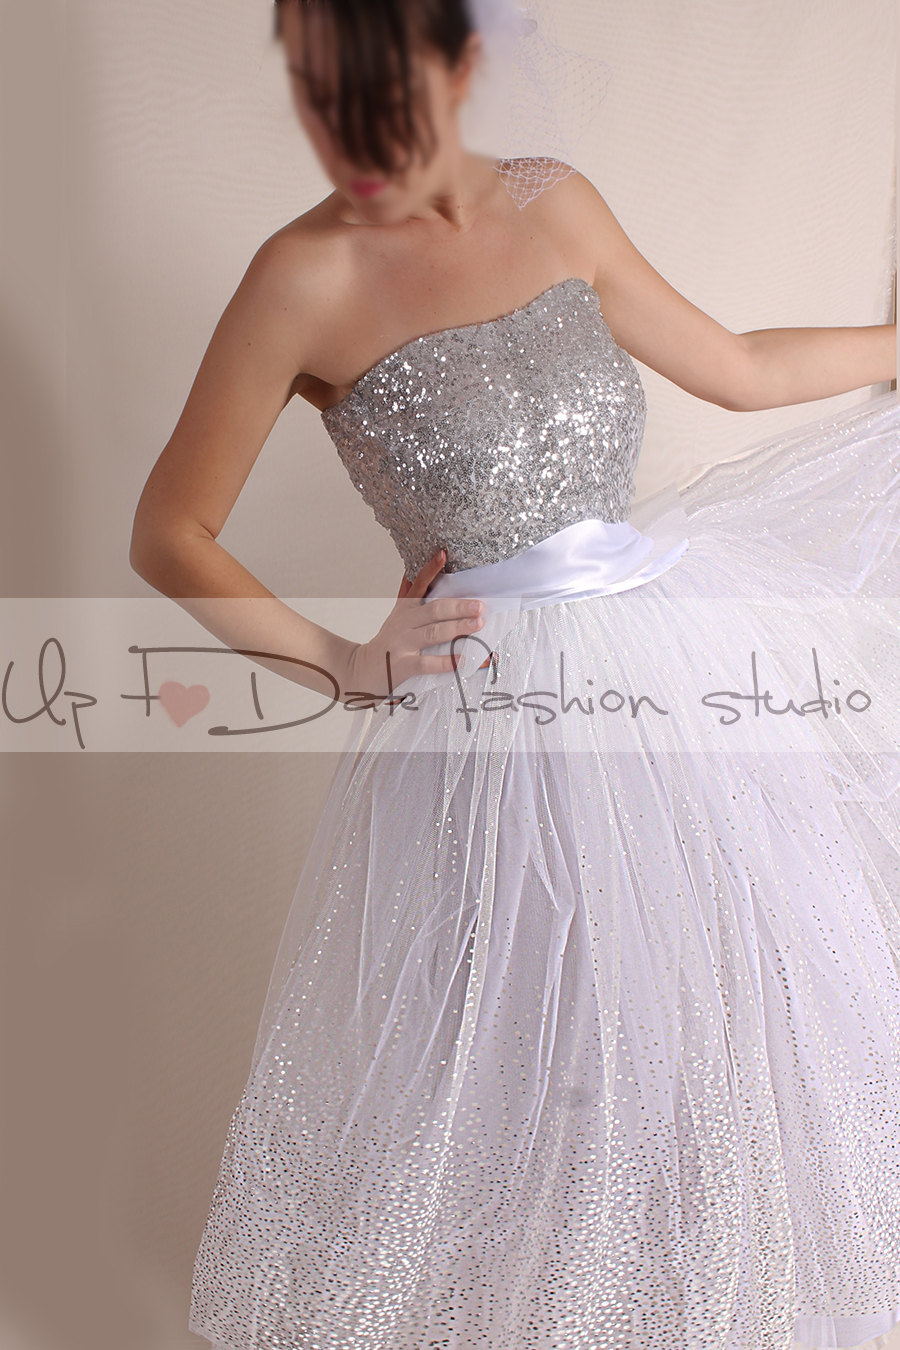 Plus Size Vintage Inspired/Wedding Dress/50s Style/Tutu tulle tea length skirt with sequin Strapless